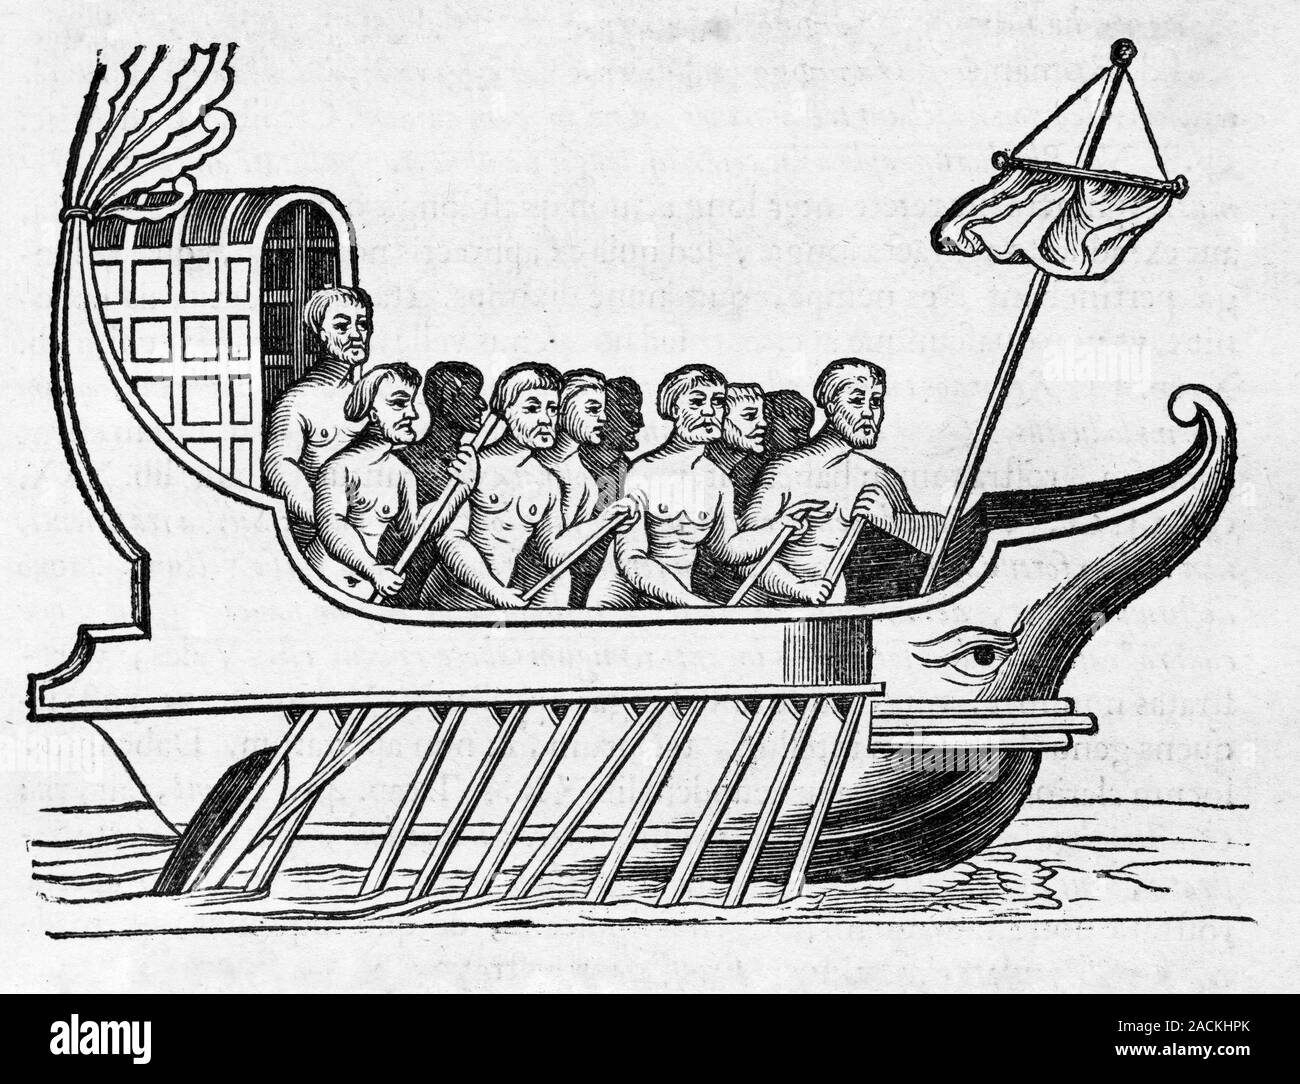 The Argo. 17th Century woodcut of Jason and the Argonauts in the Argo ship from Greek mythology. Published in 'De militia navali veterum' by Johannes Stock Photo